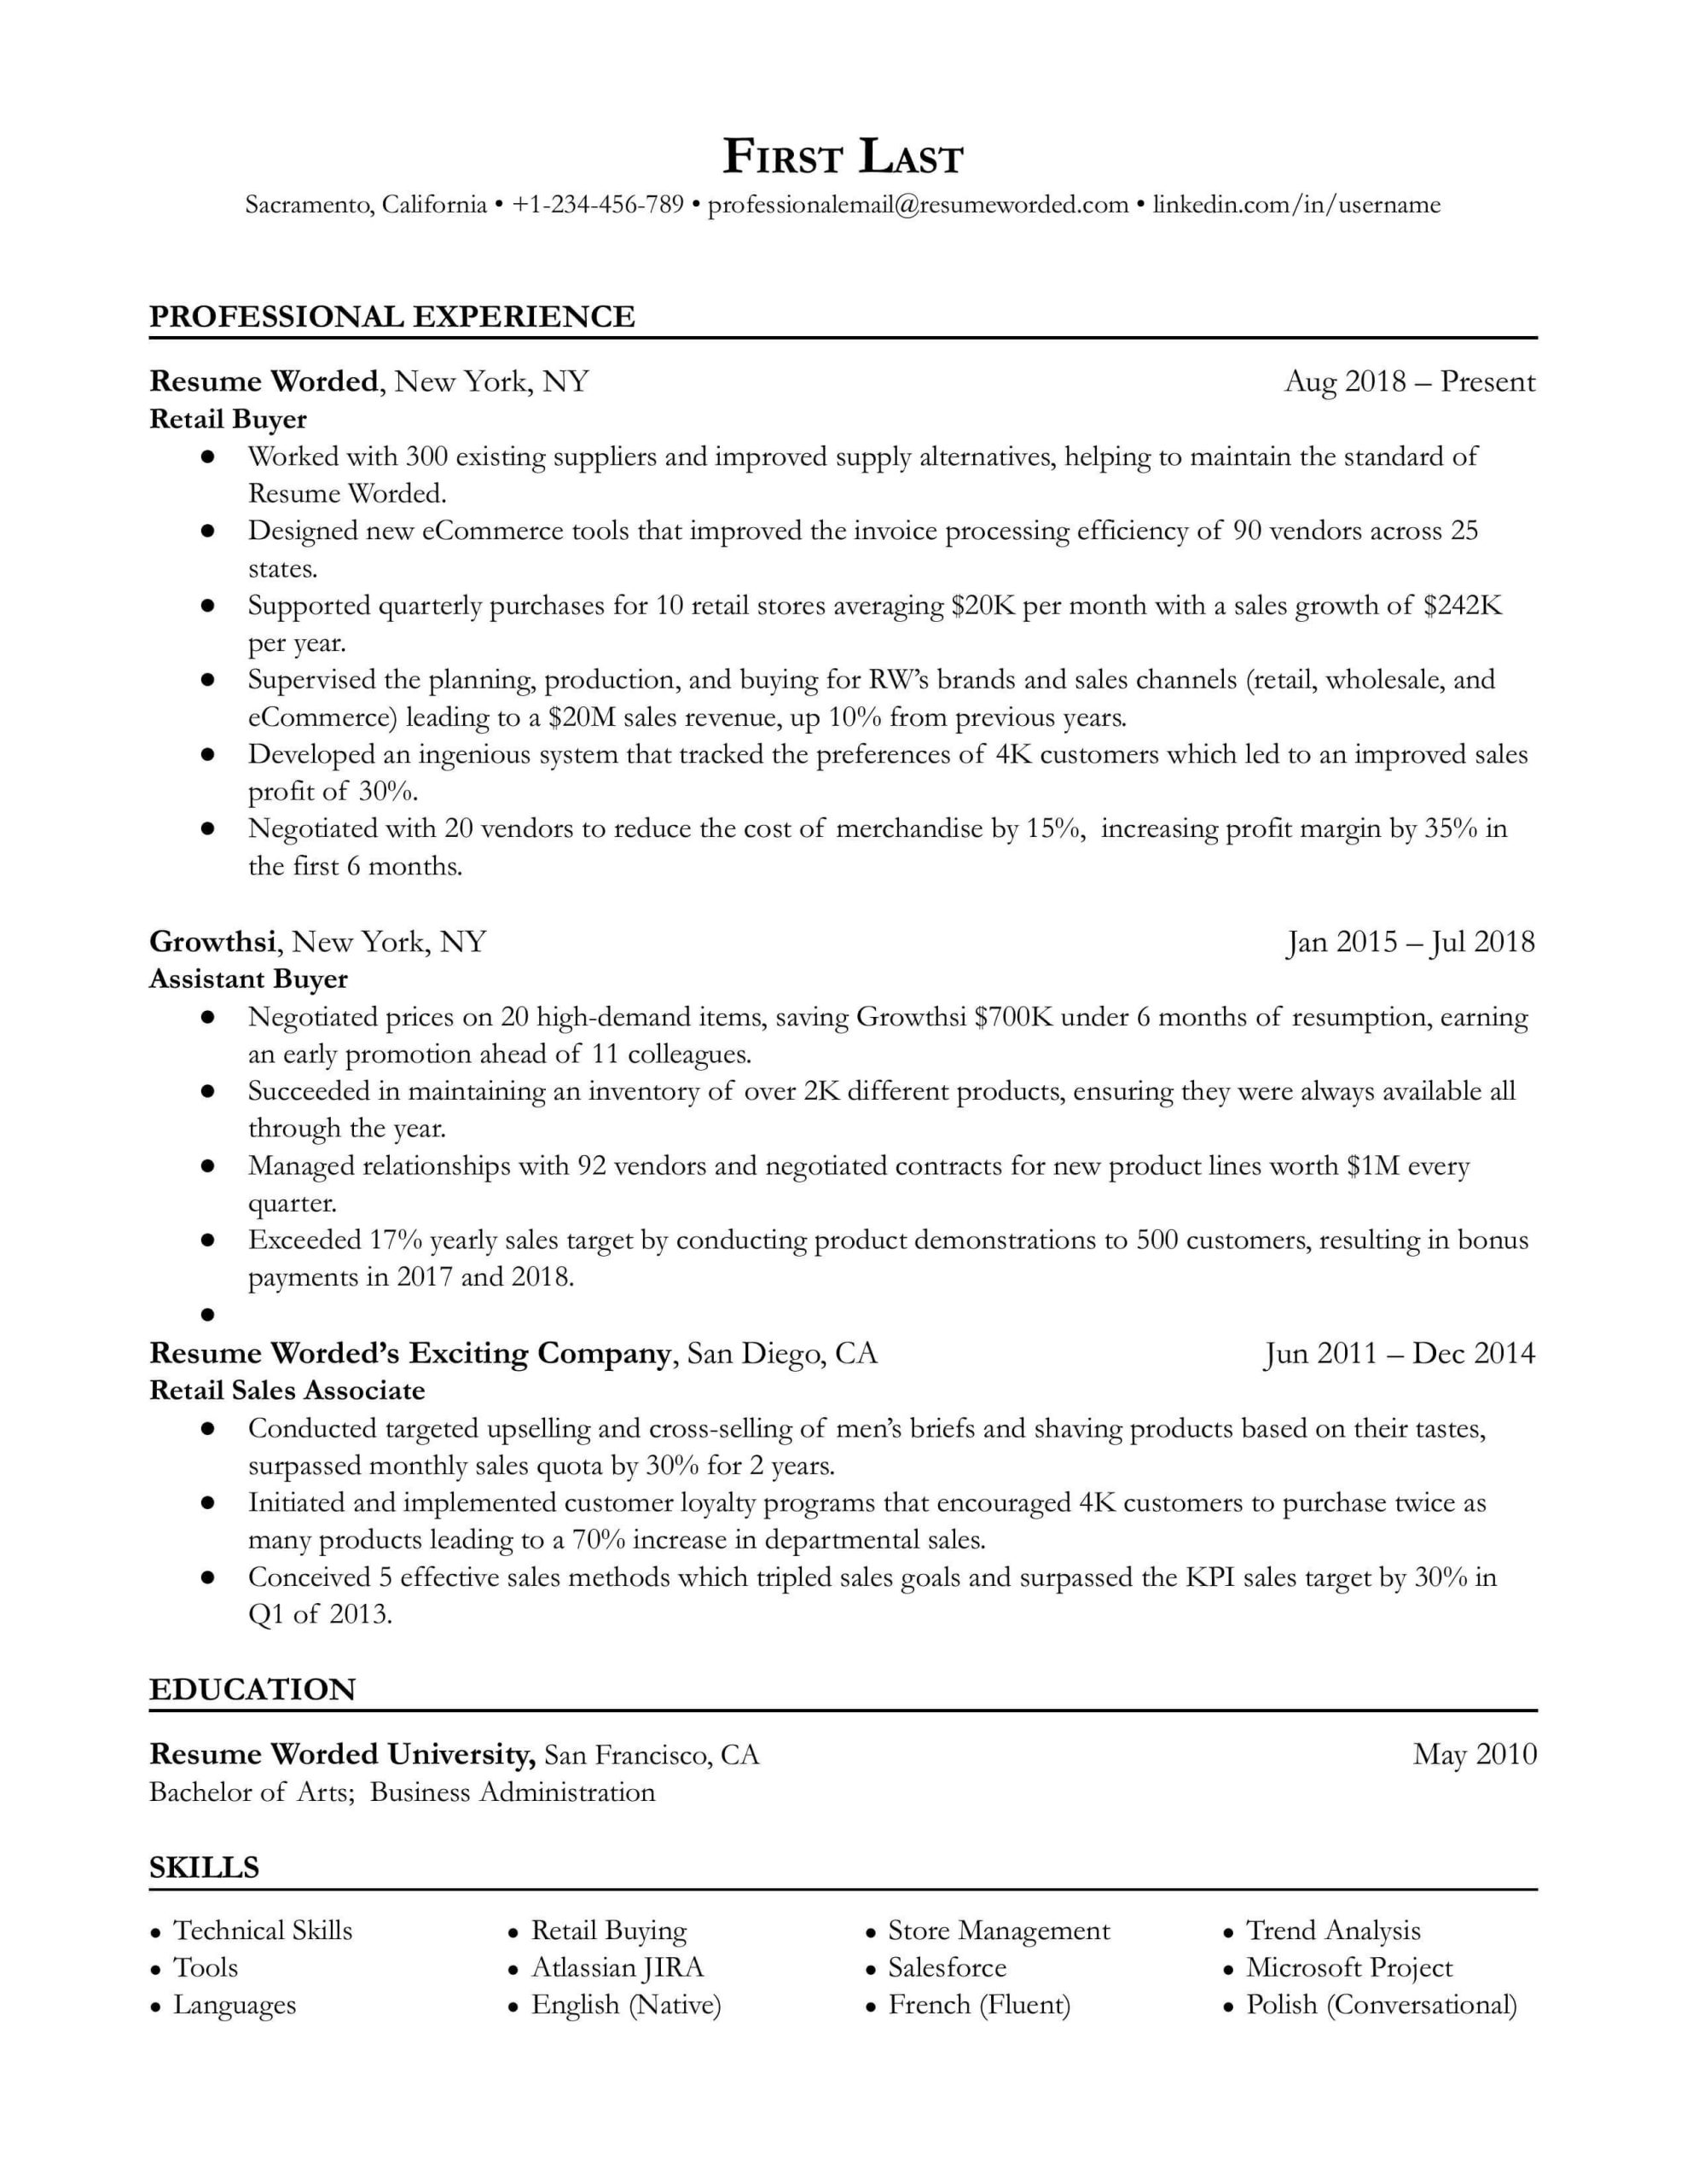 Professional Summary Resume Sample for Retail 5 Retail Resume Examples for 2022 Resume Worded